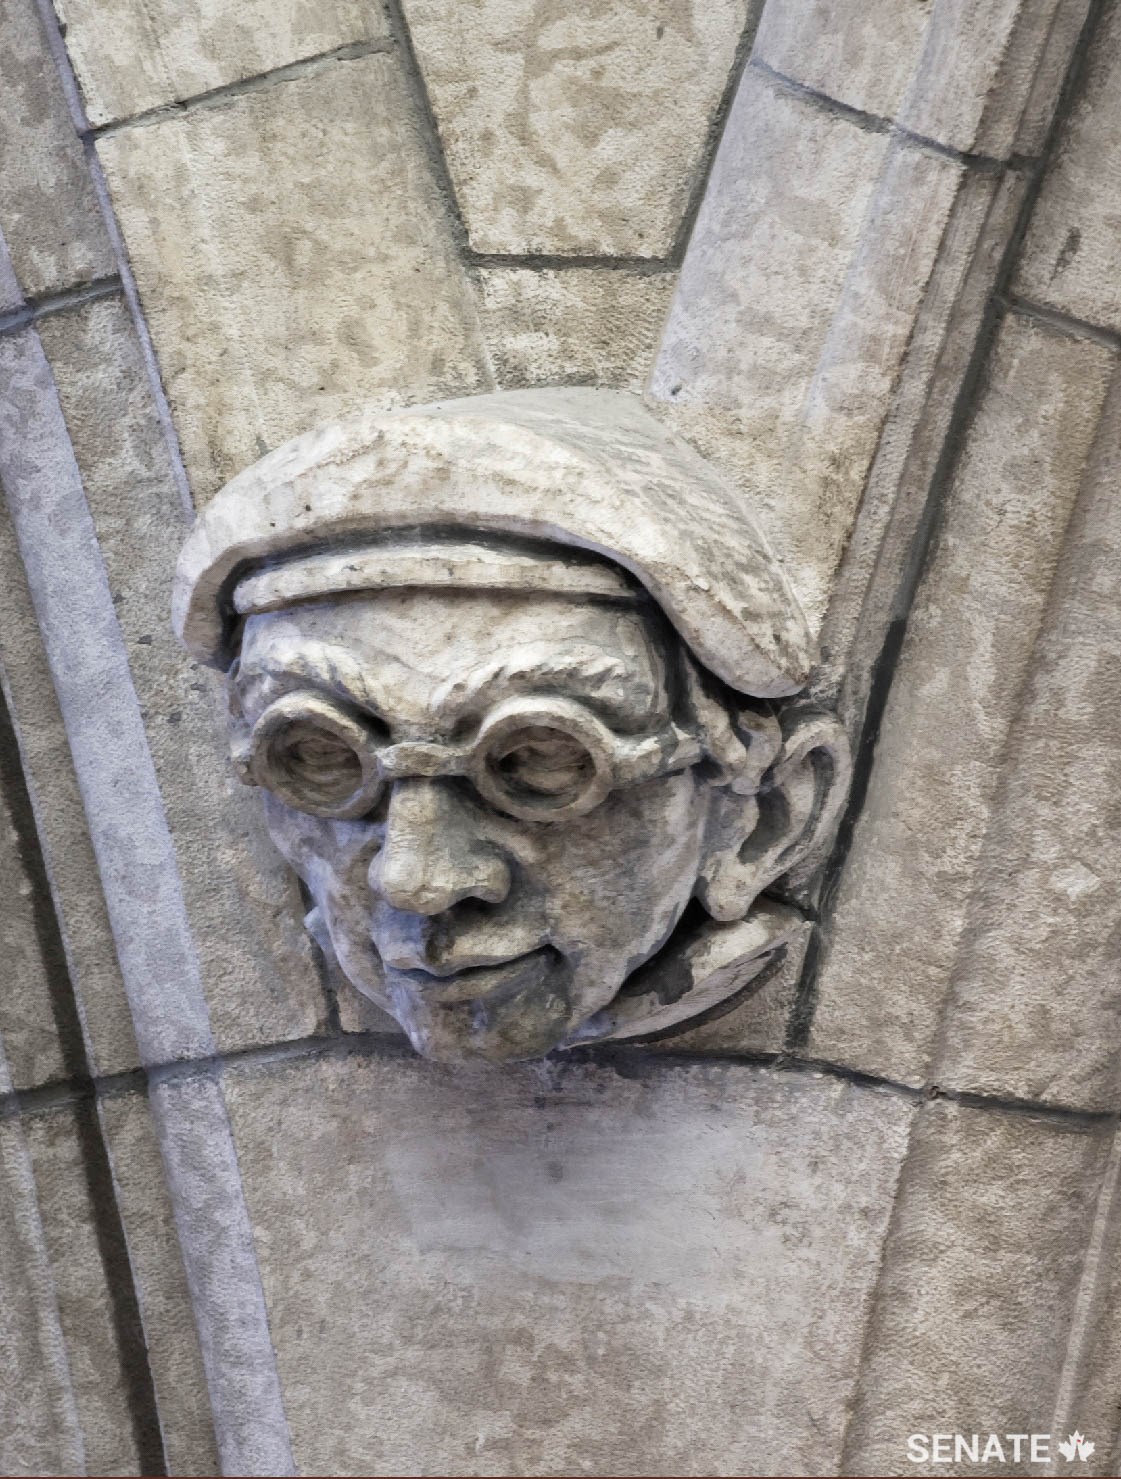 A self-portrait of one of the sculptors who worked on the Senate foyer in the 1950s stares down from high above.